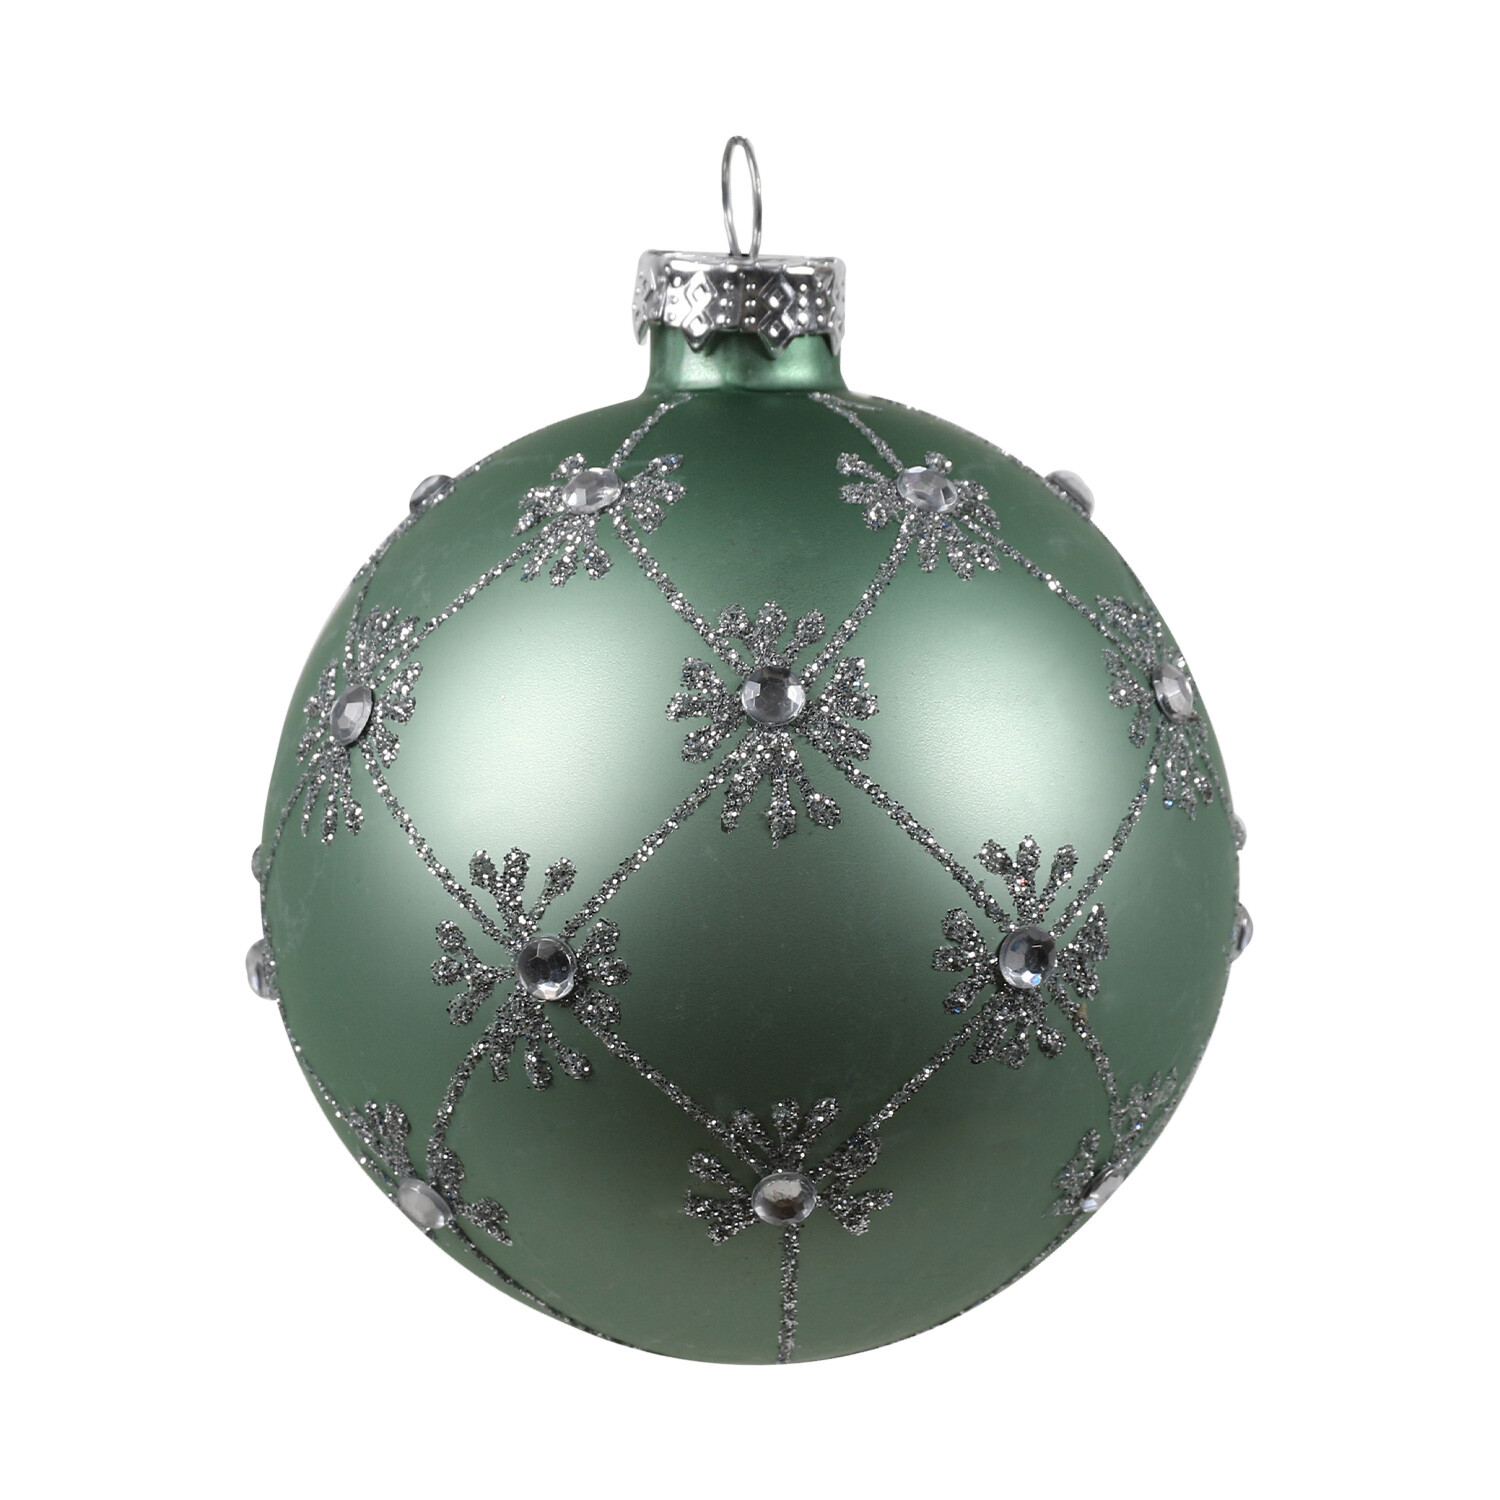 Sage Bauble with Glitter Design - Green Image